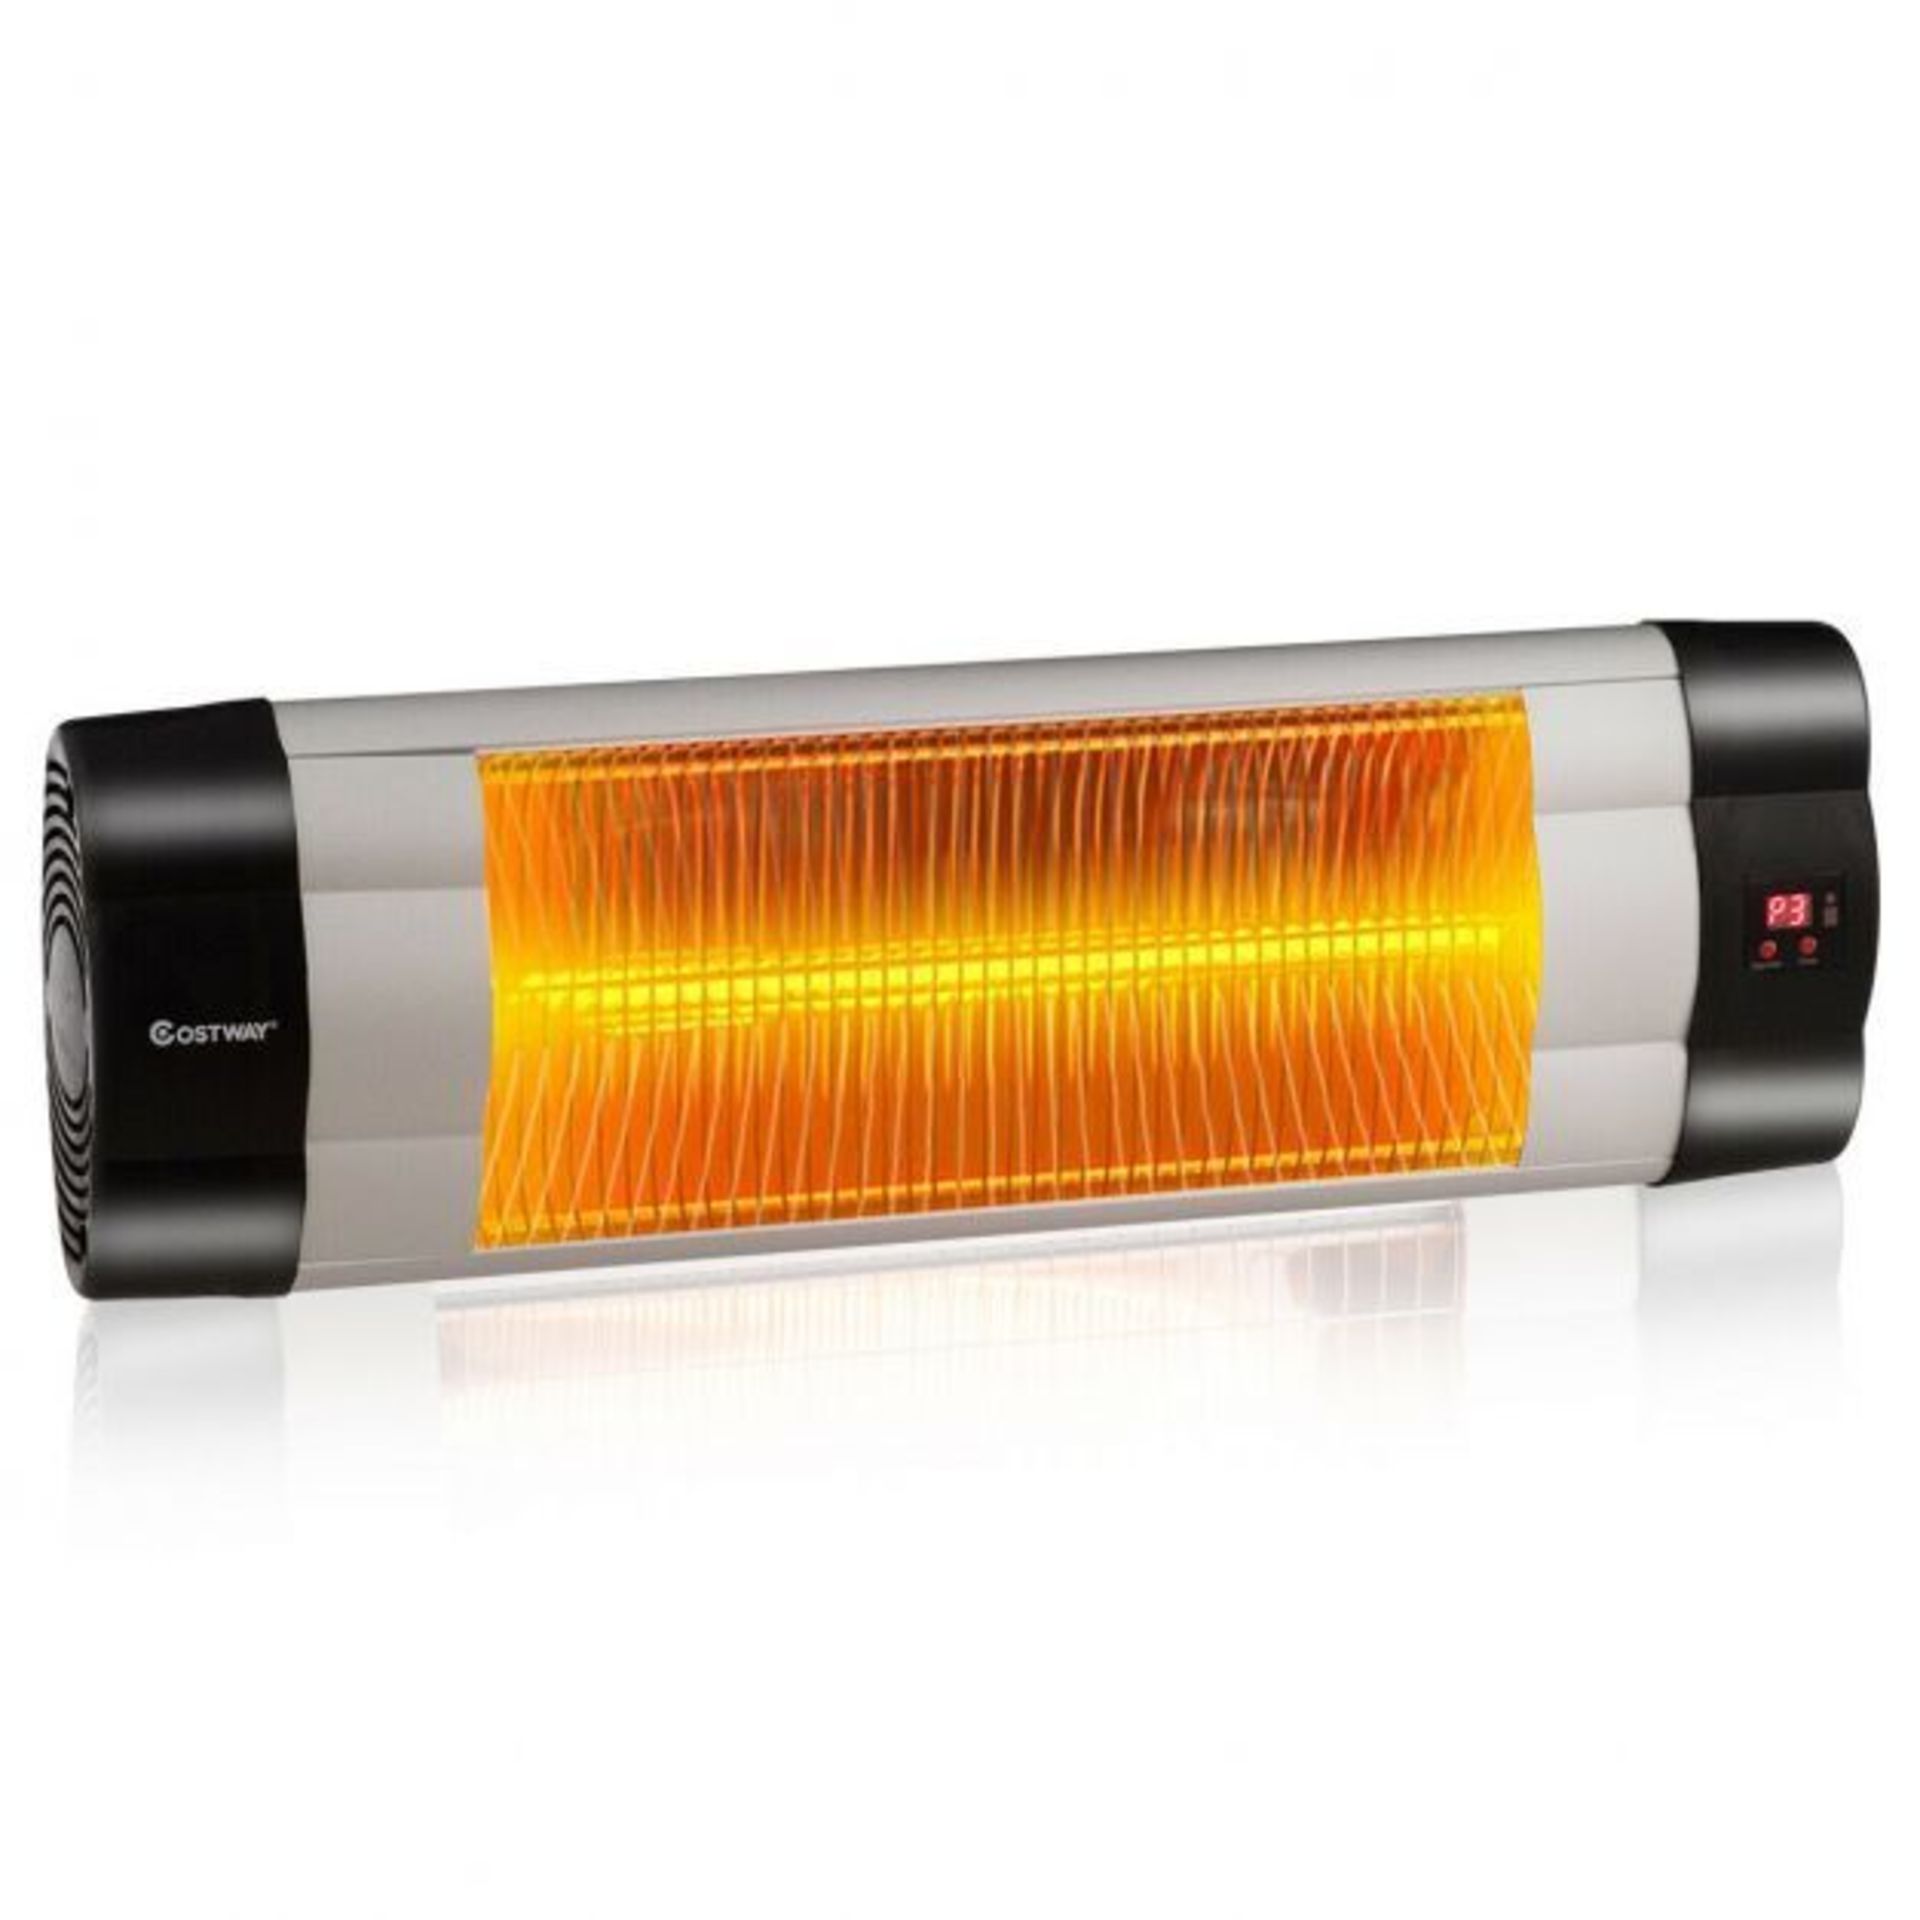 1500W Electric Wall Mounted Heater with Remote Control for Garden Patio. - ER54. The built-in carbon